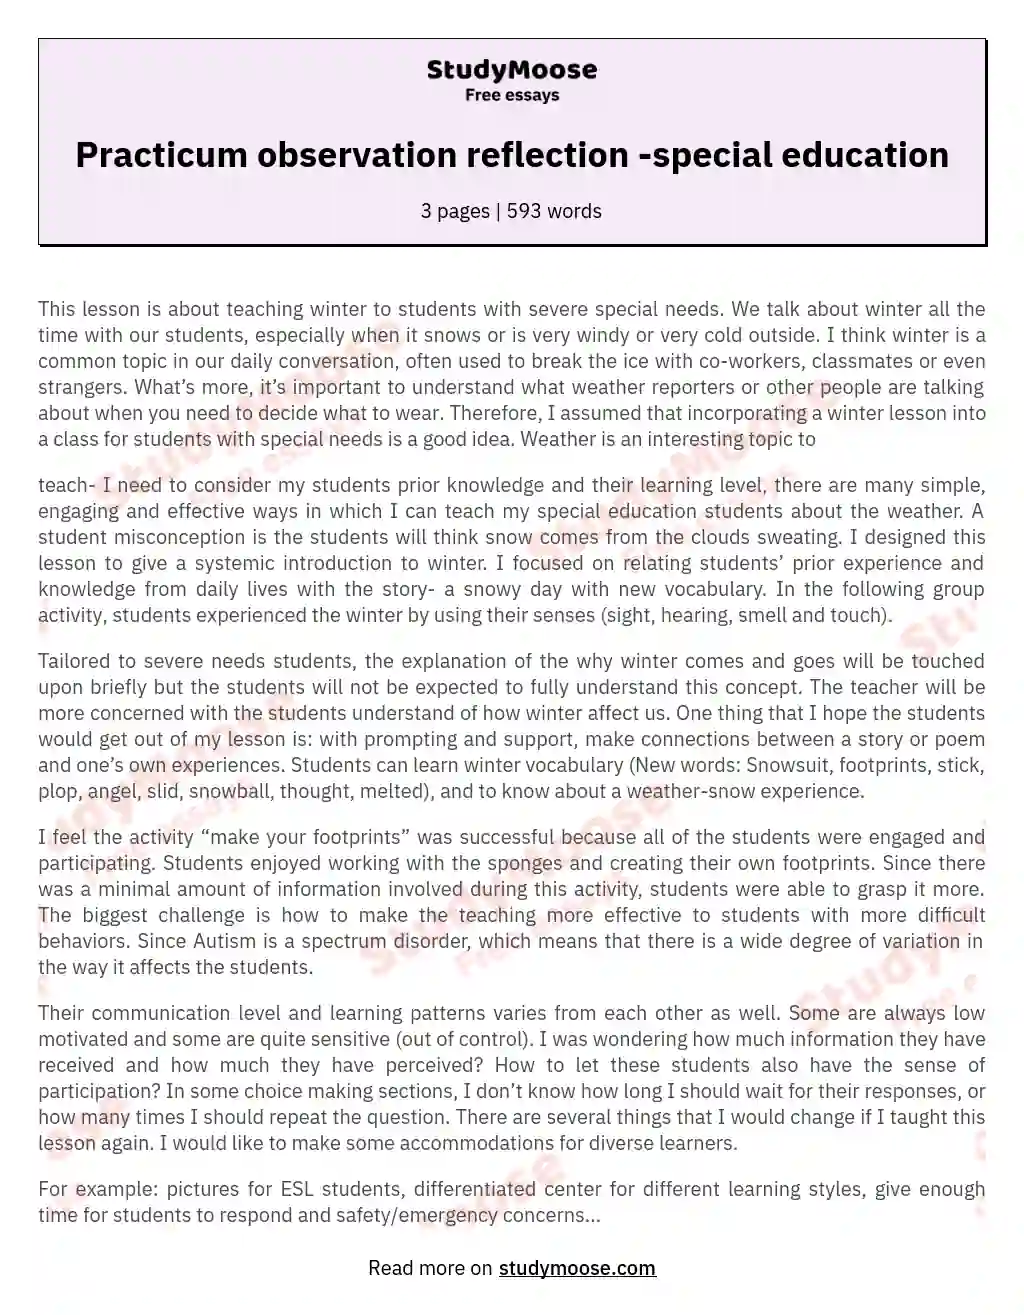 Practicum observation reflection -special education essay